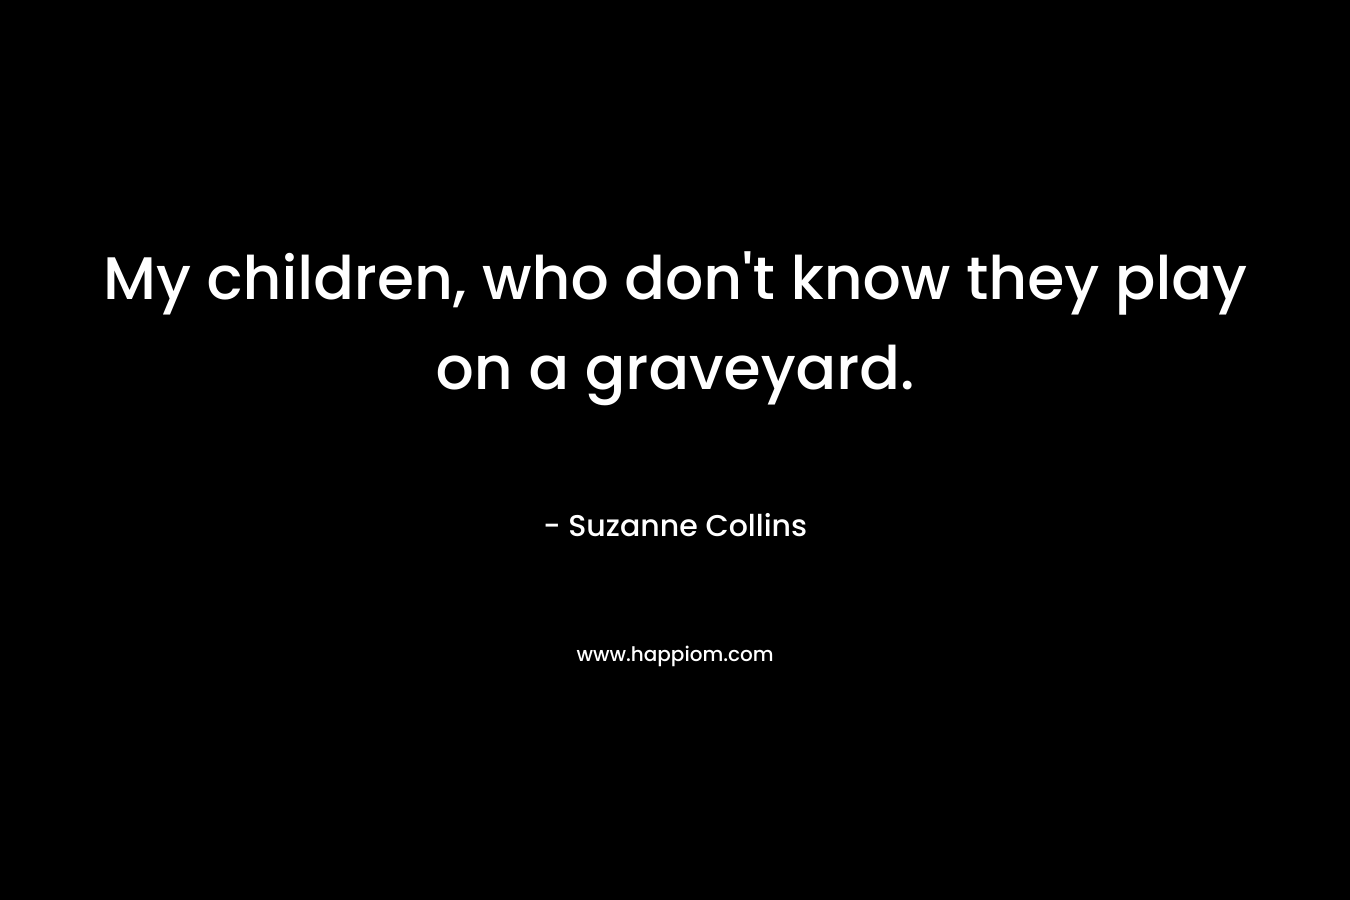 My children, who don’t know they play on a graveyard. – Suzanne Collins